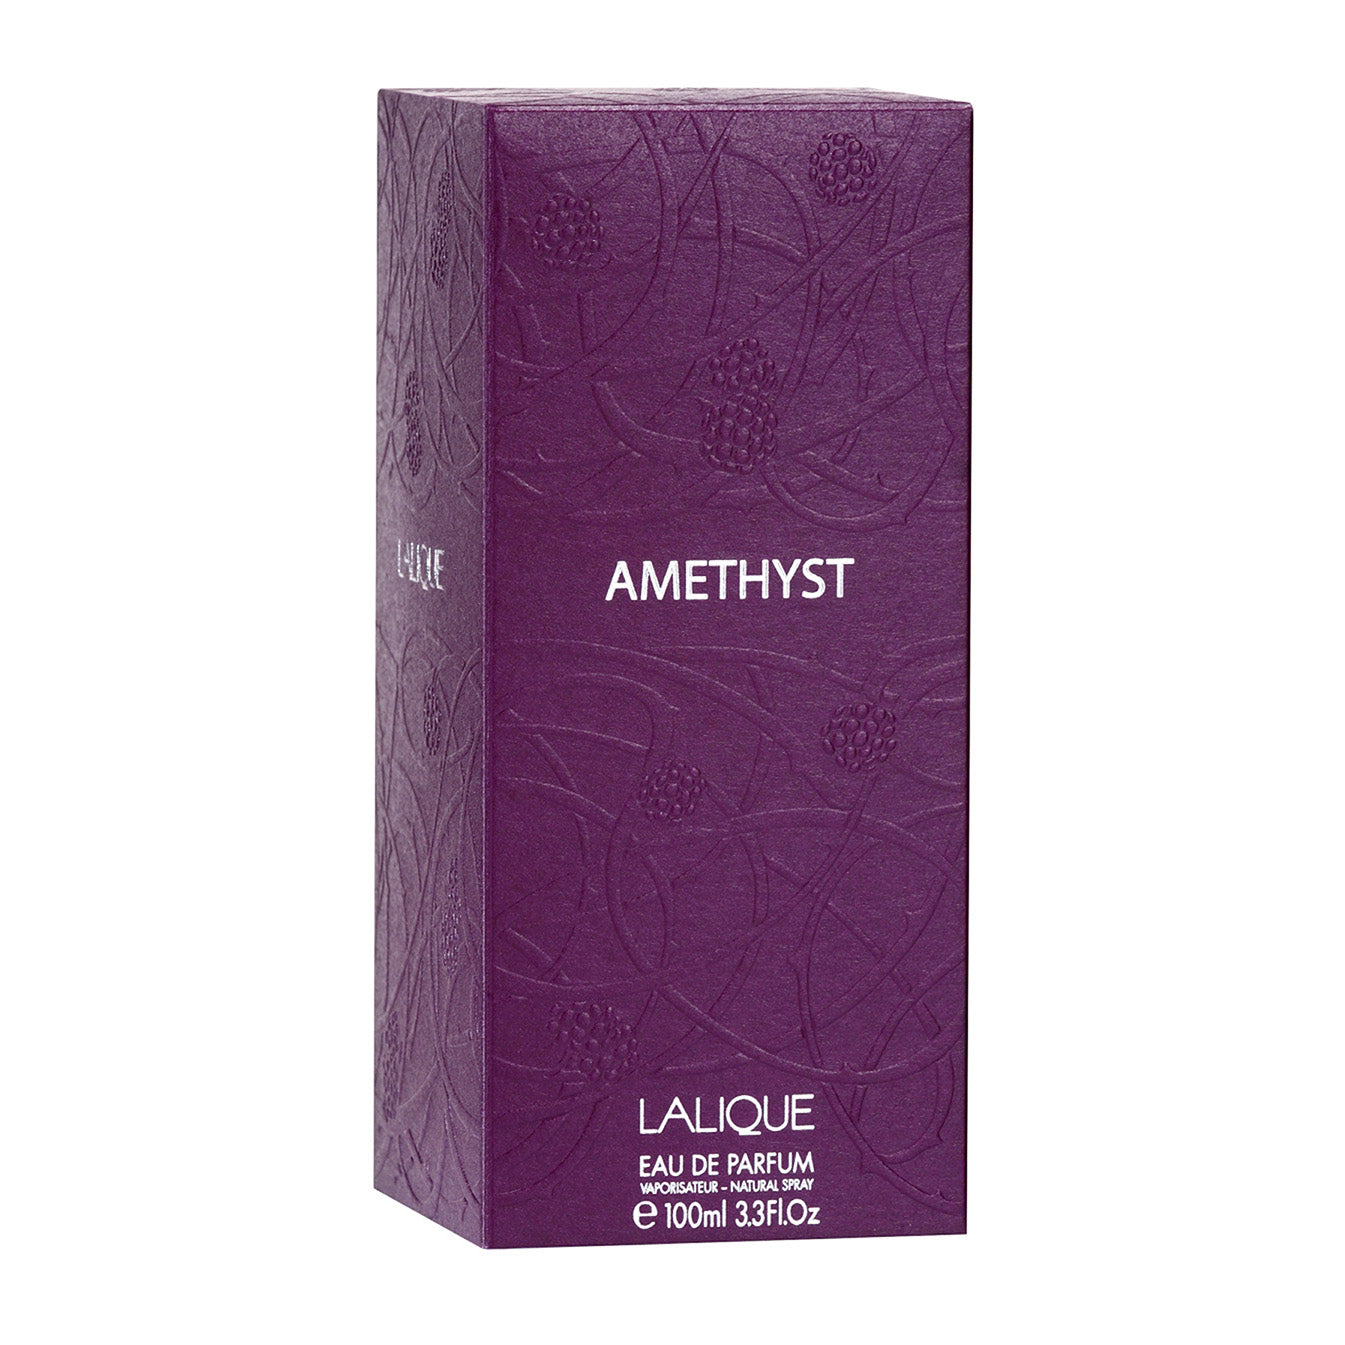 LALIQUE AMETHYST EDP 100ML - EASTERN SCENT